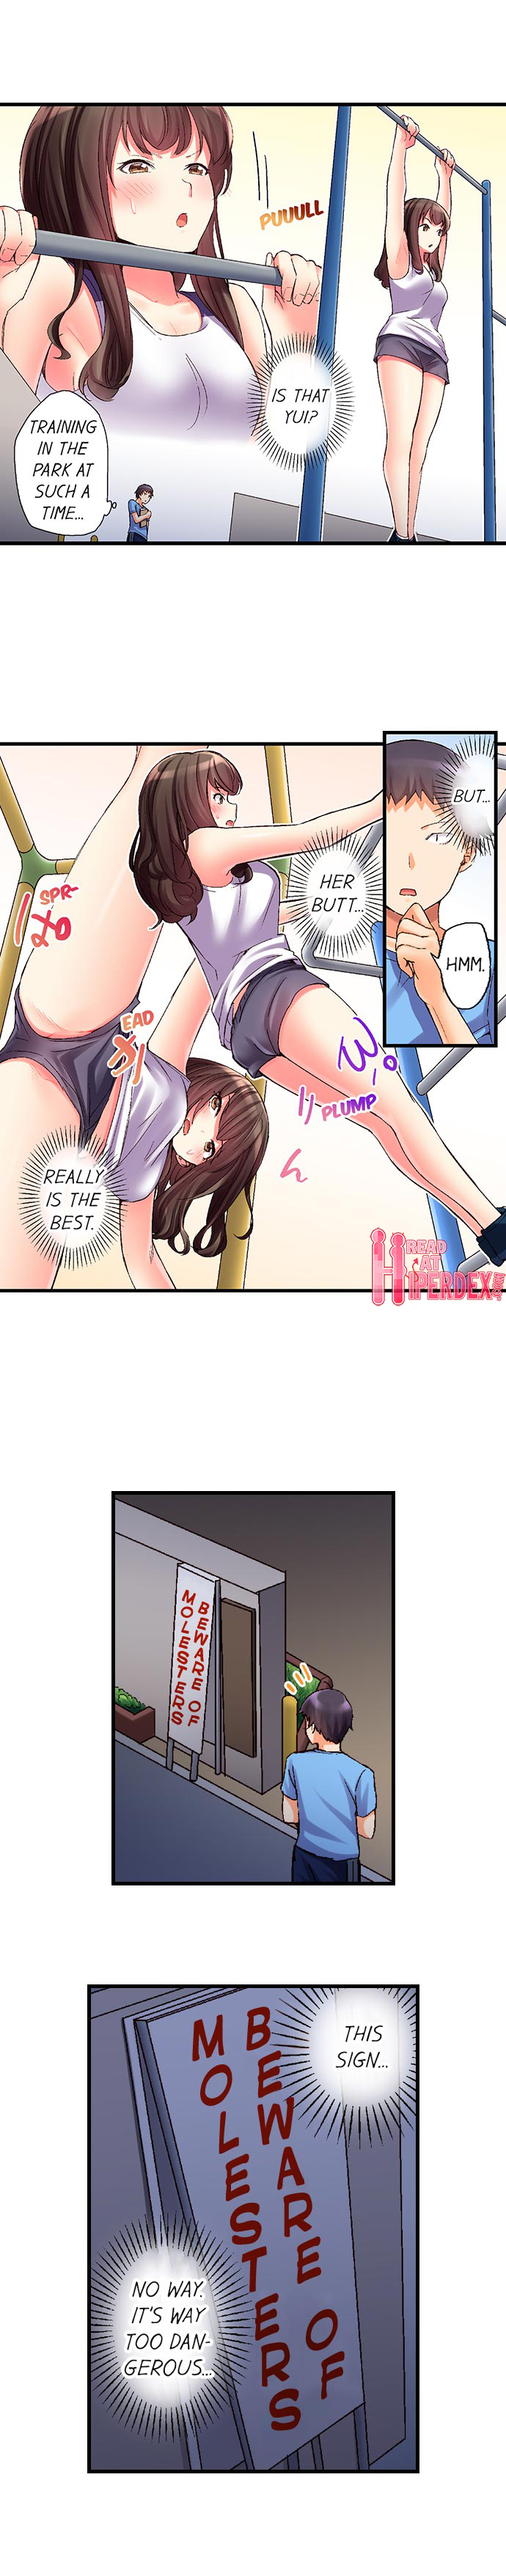 No Panty Booty Workout! - Chapter 16 Page 4